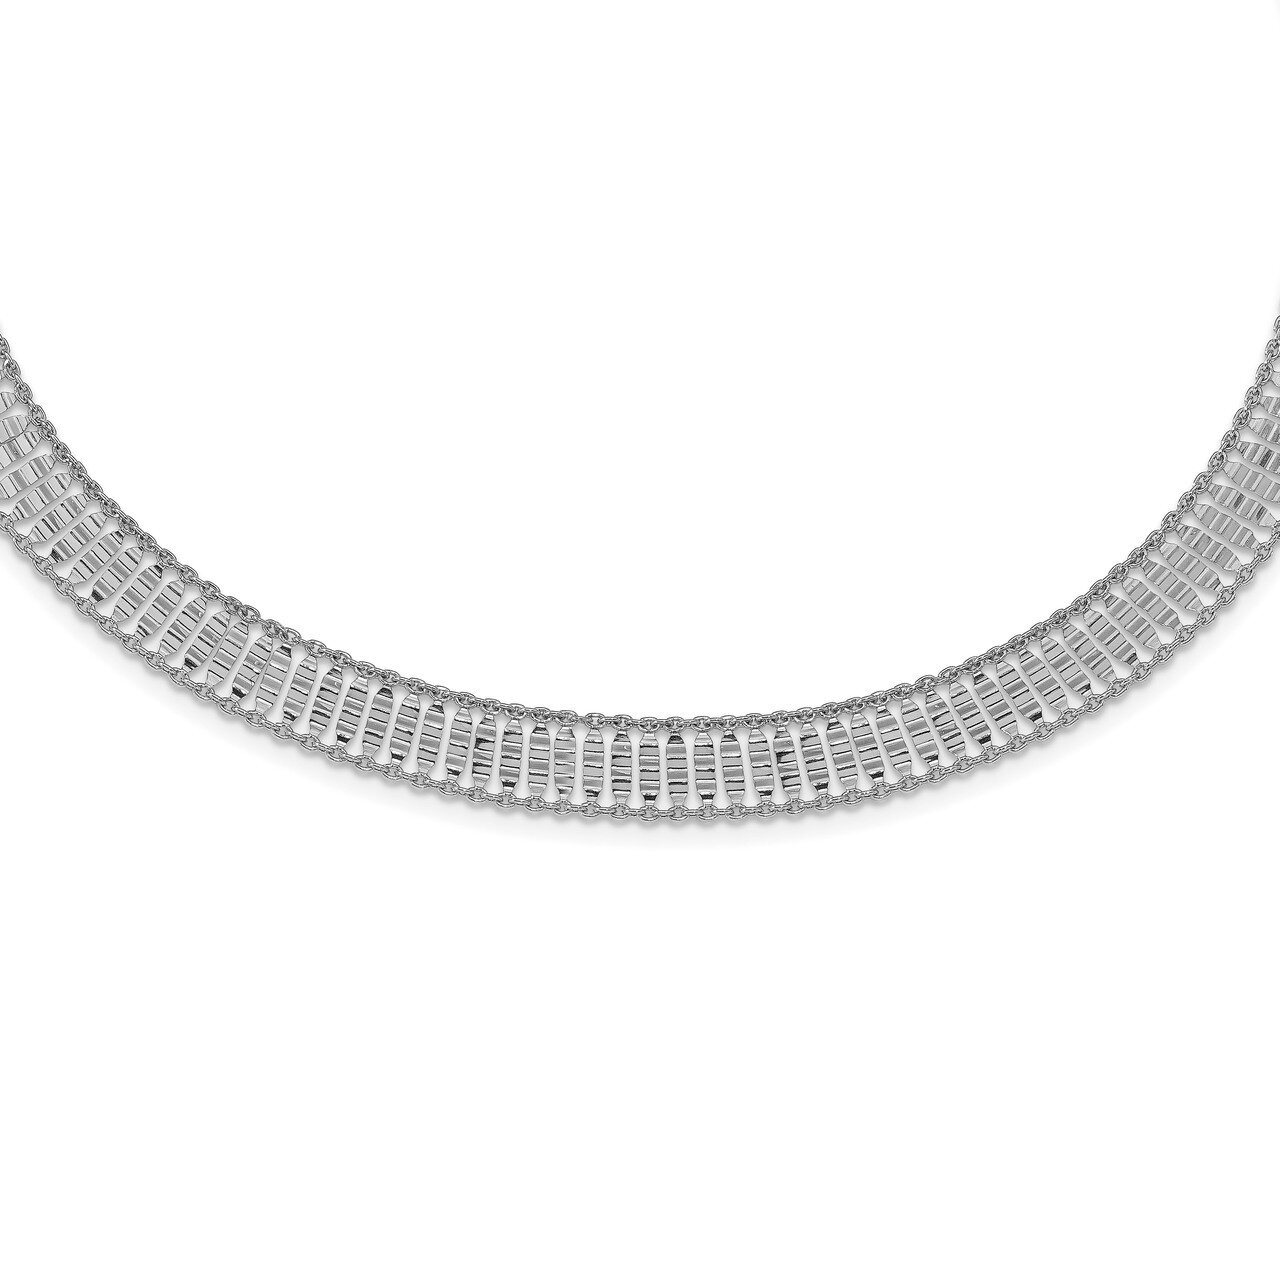 4 in ext. Choker Necklace 12 Inch Sterling Silver Polished HB-QLF1009-12